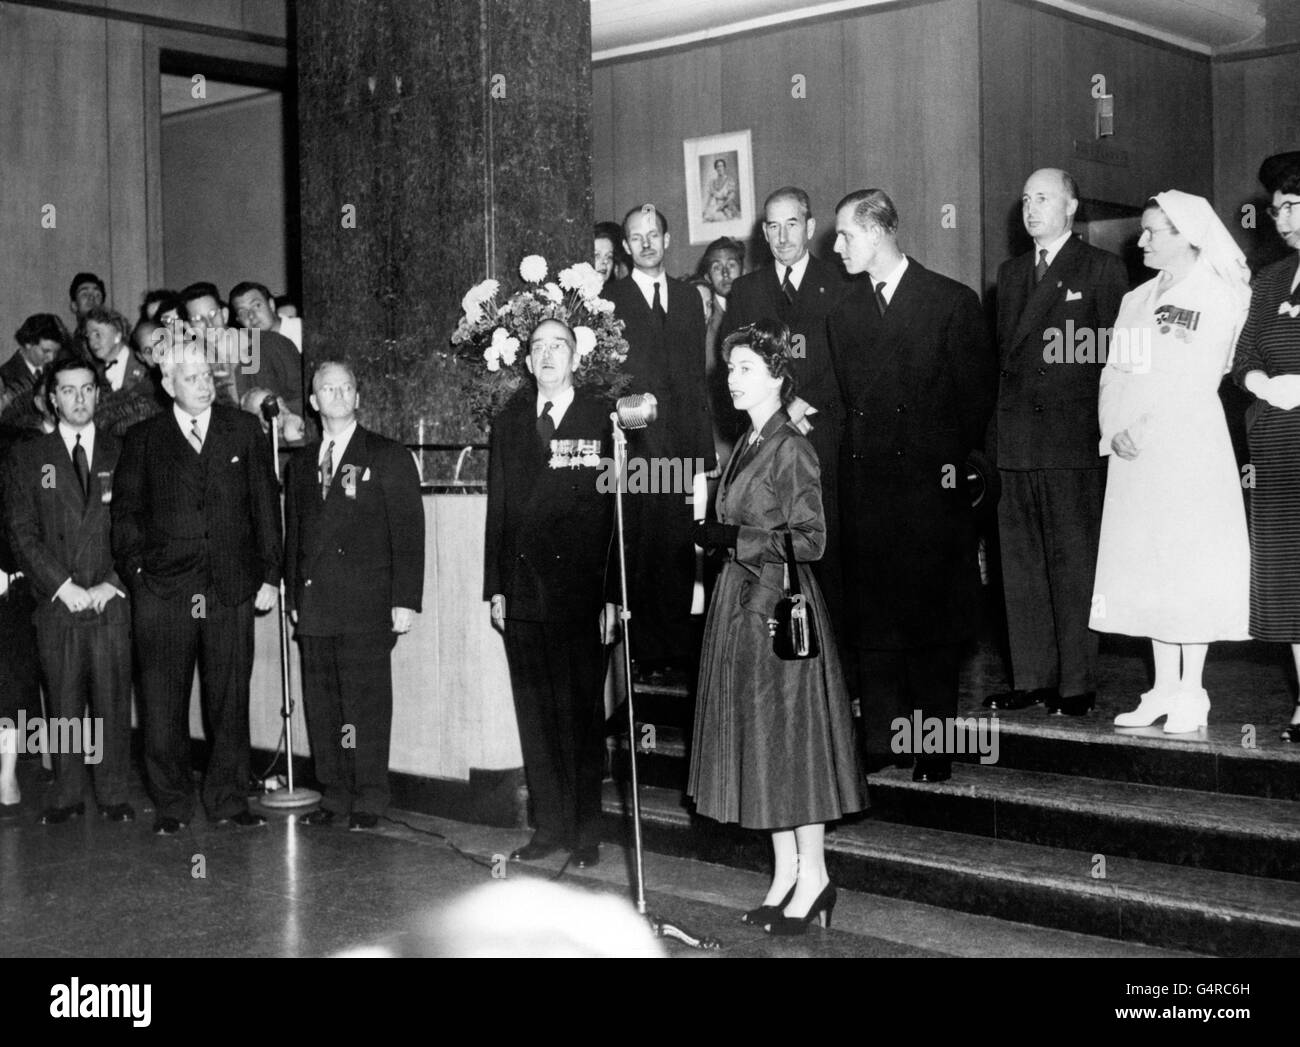 Princess Elizabeth gives a speech during a visit to the 1,500 bed Sunnybrook Hospital, Toronto which is one of the largest military hospitals in the British Empire, during her Royal Tour of Canada. Behind the Princess, looking to his right, is the Duke of Edinburgh. During the visit, the Princess and the Duke talked with veterans of both World Wars and of Korea. Stock Photo